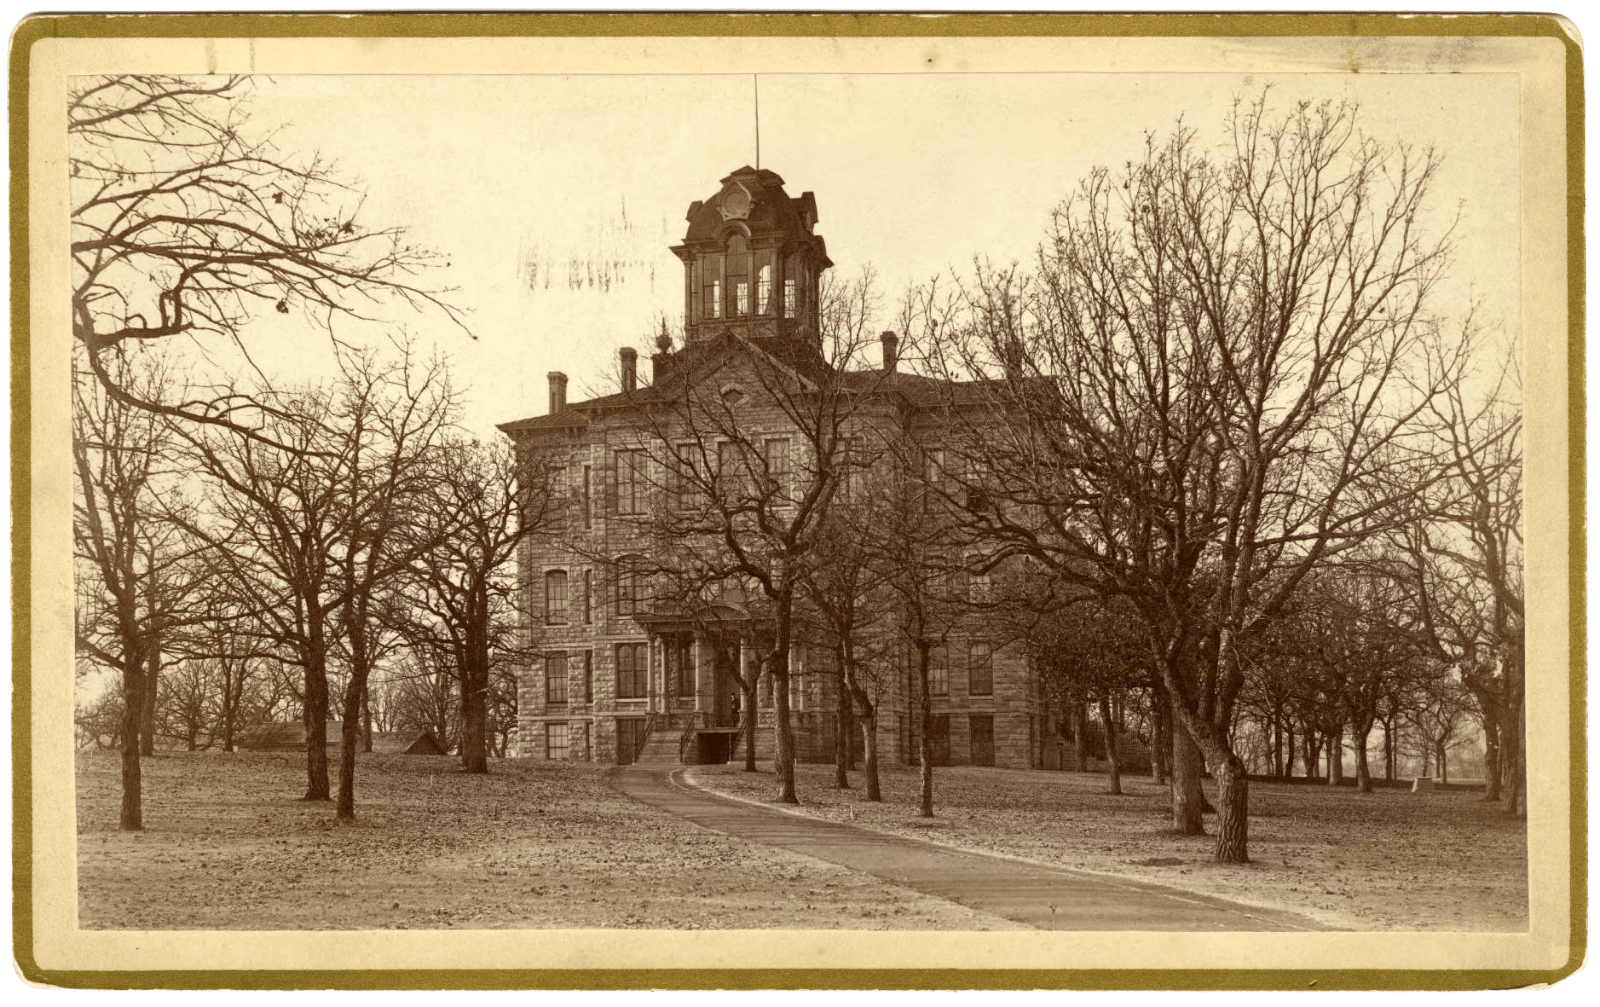 an old brick building in a historic photo